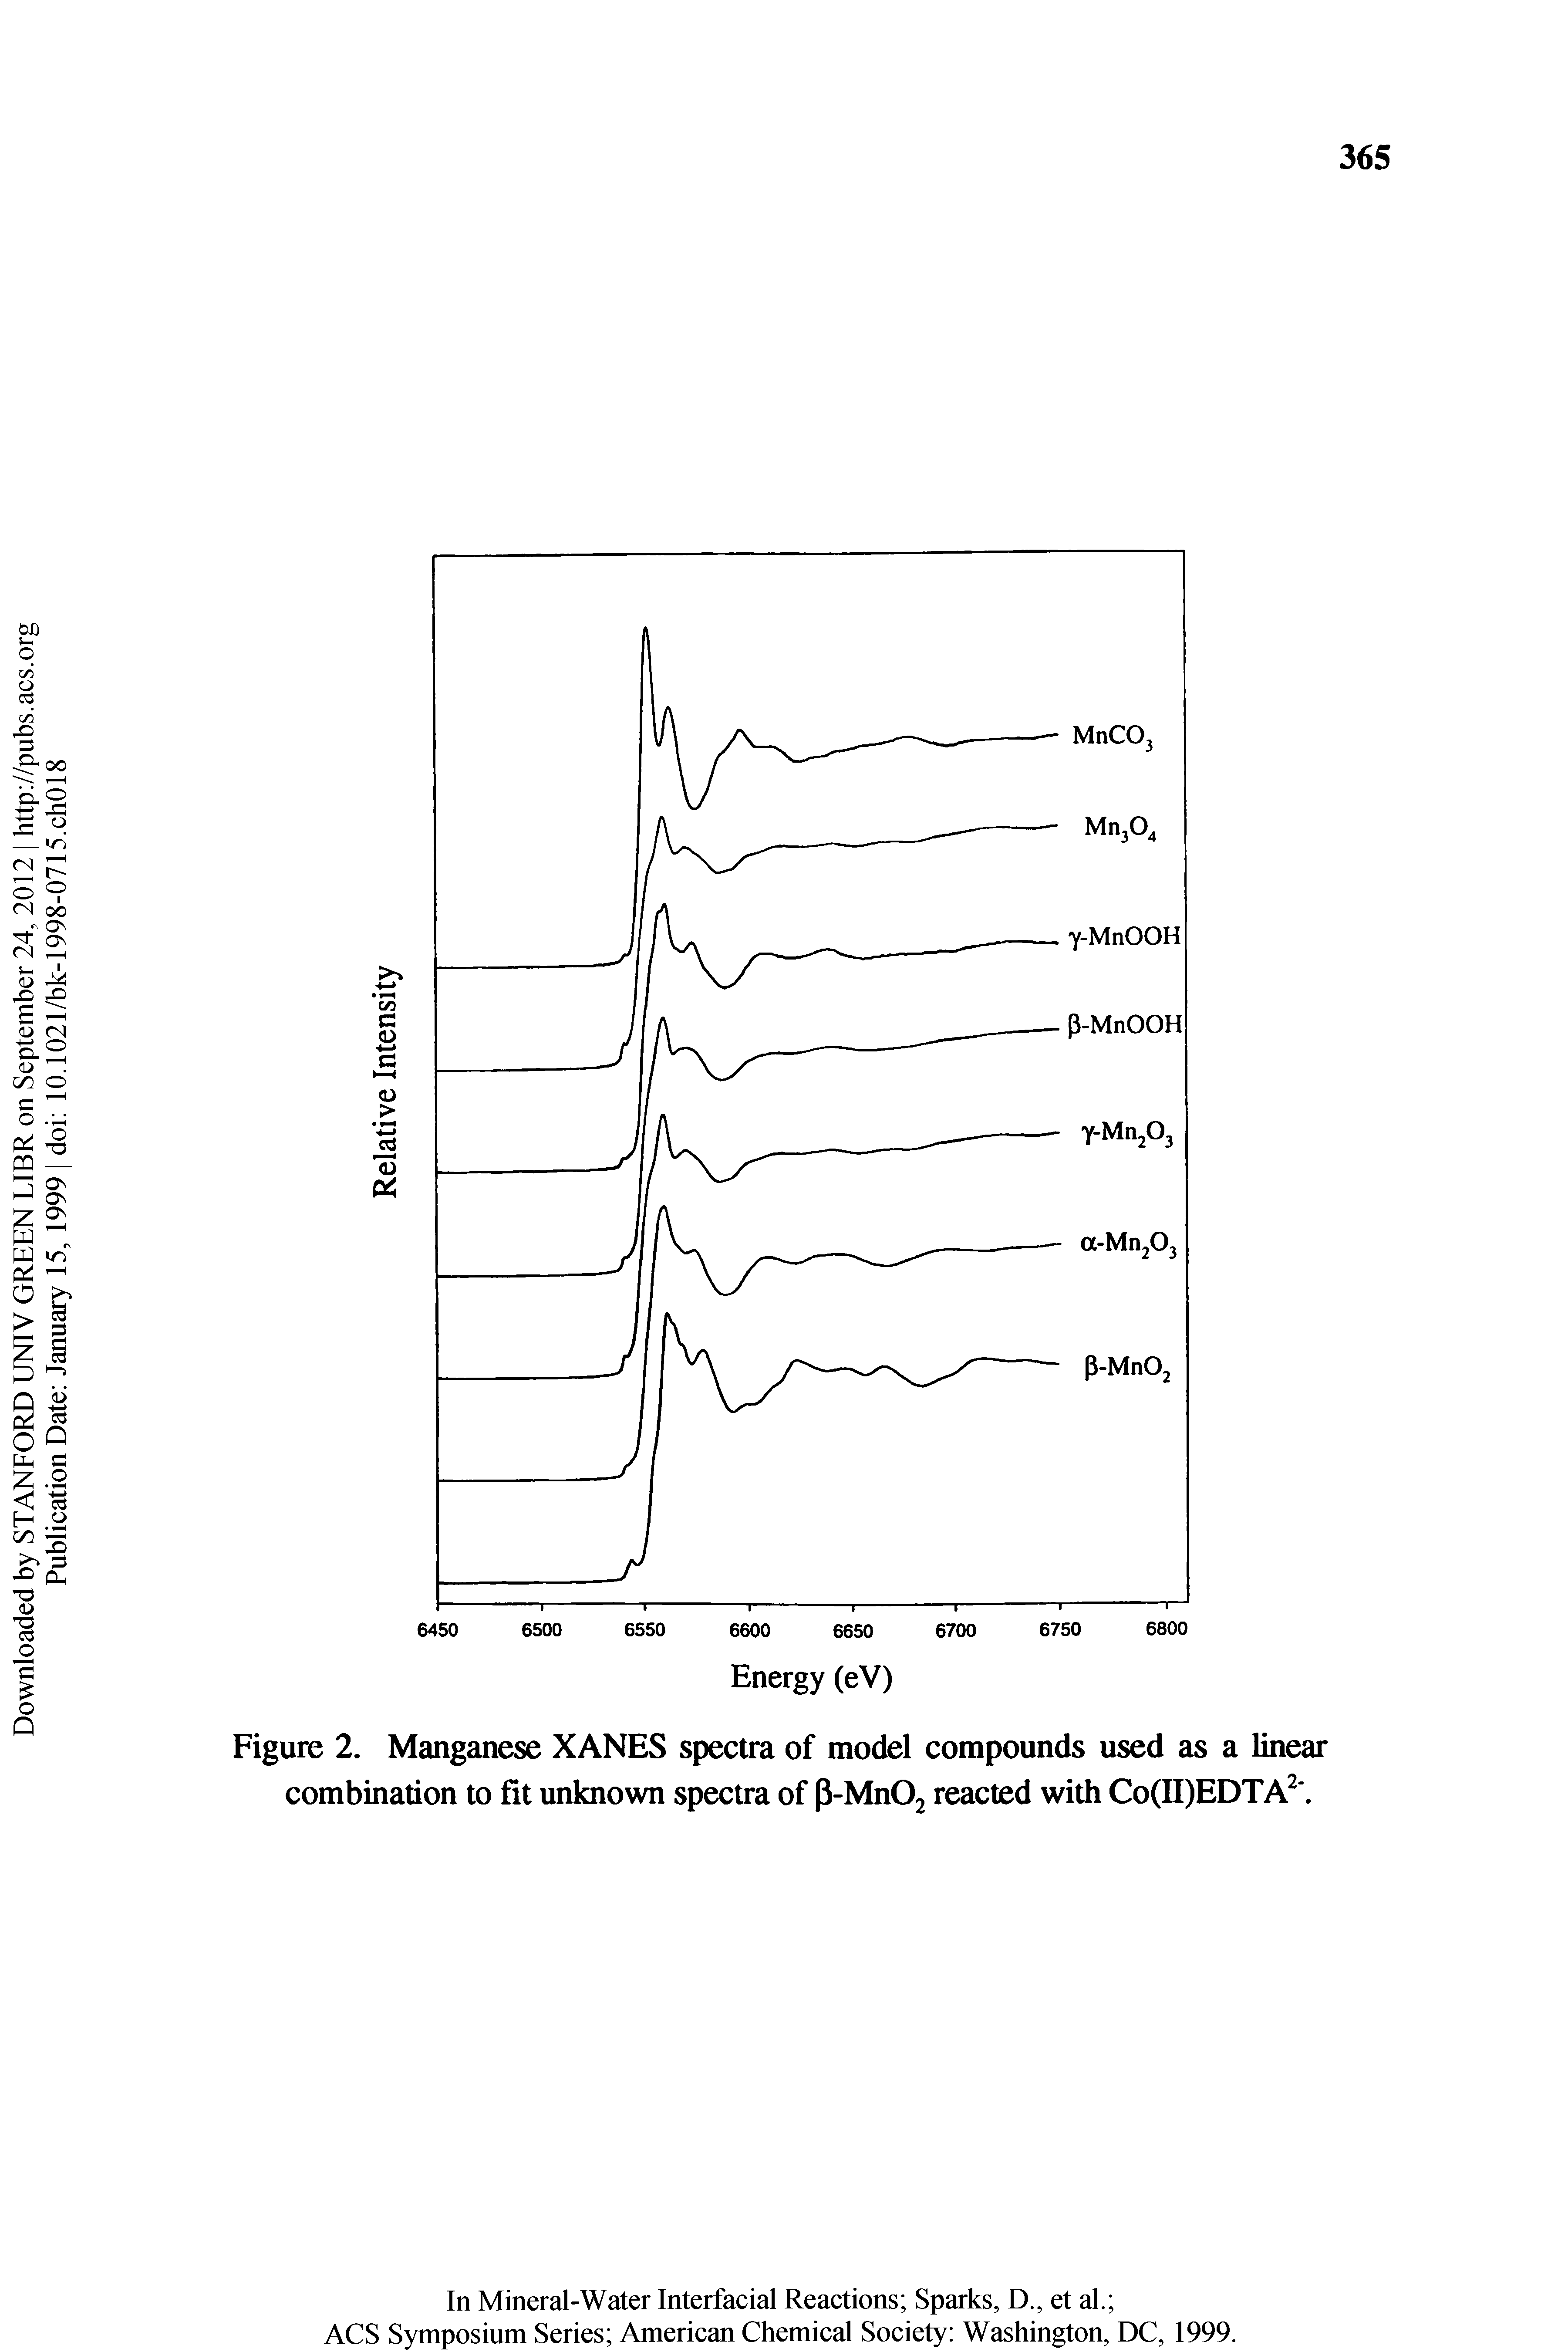 Figure 2. Manganese XANES spectra of model compounds used as a linear combination to fit unknown spectra of P-MnOj reacted with Co(II)EDTA .